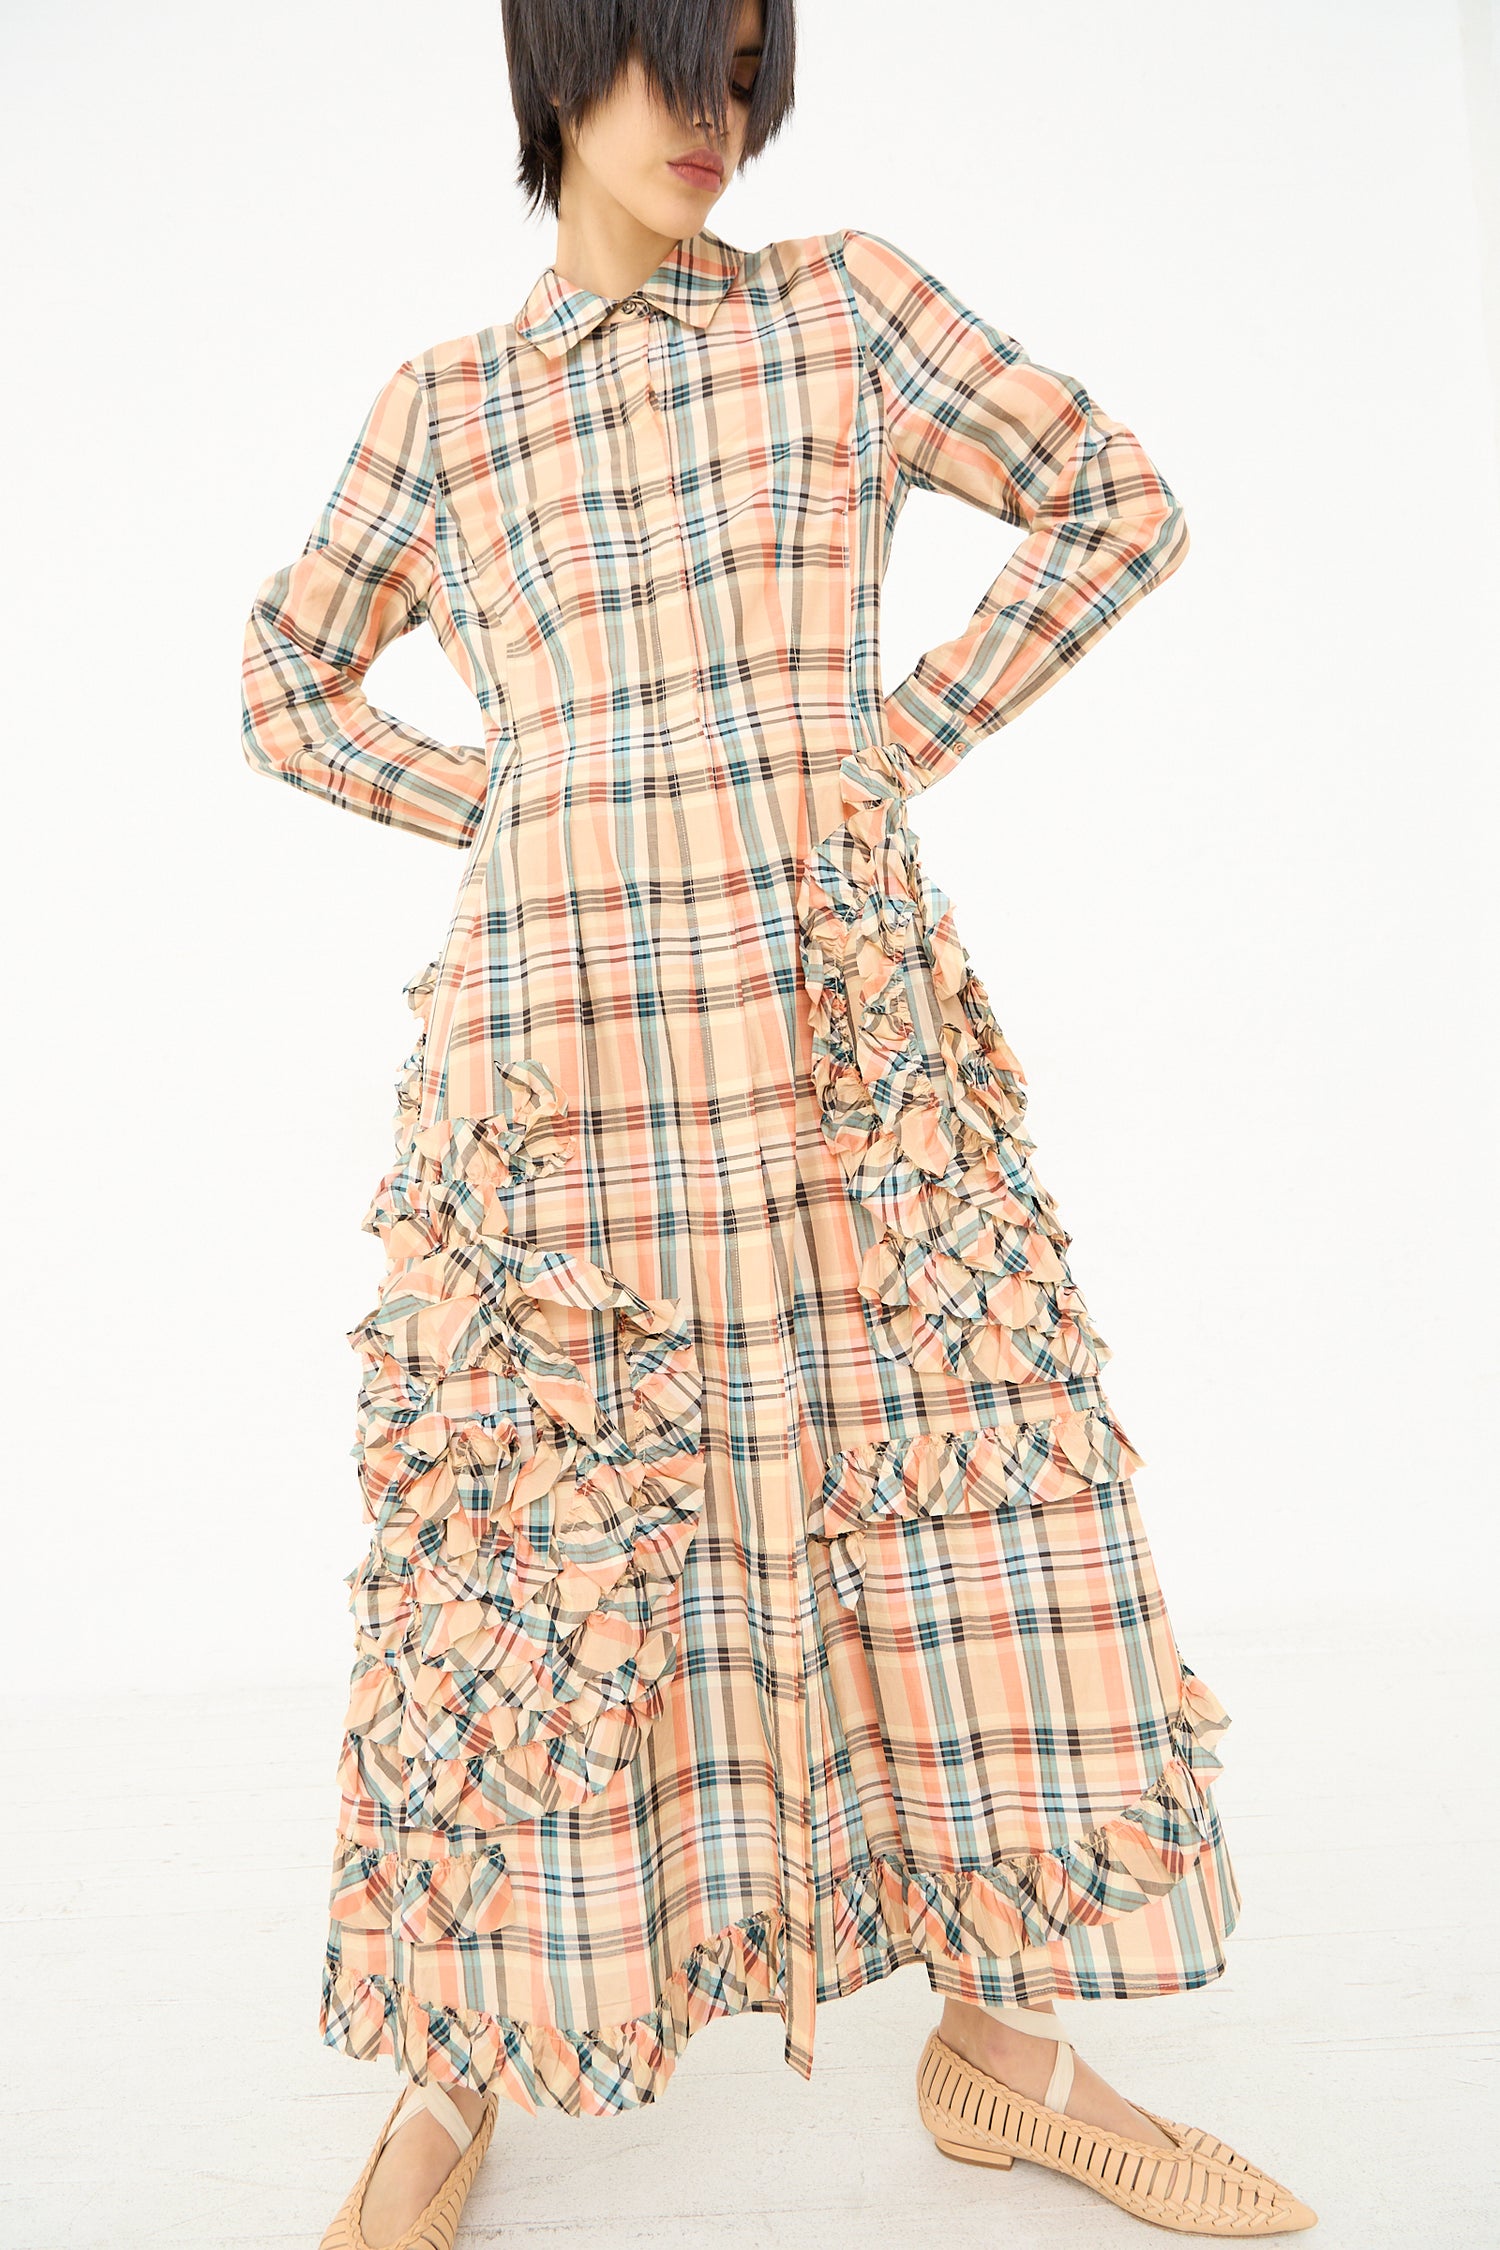 A person modeling an Ulla Johnson Gwen Dress in Meadow, a long-sleeved, plaid maxi shirt dress with ruffle detailing, paired with beige pointed shoes.